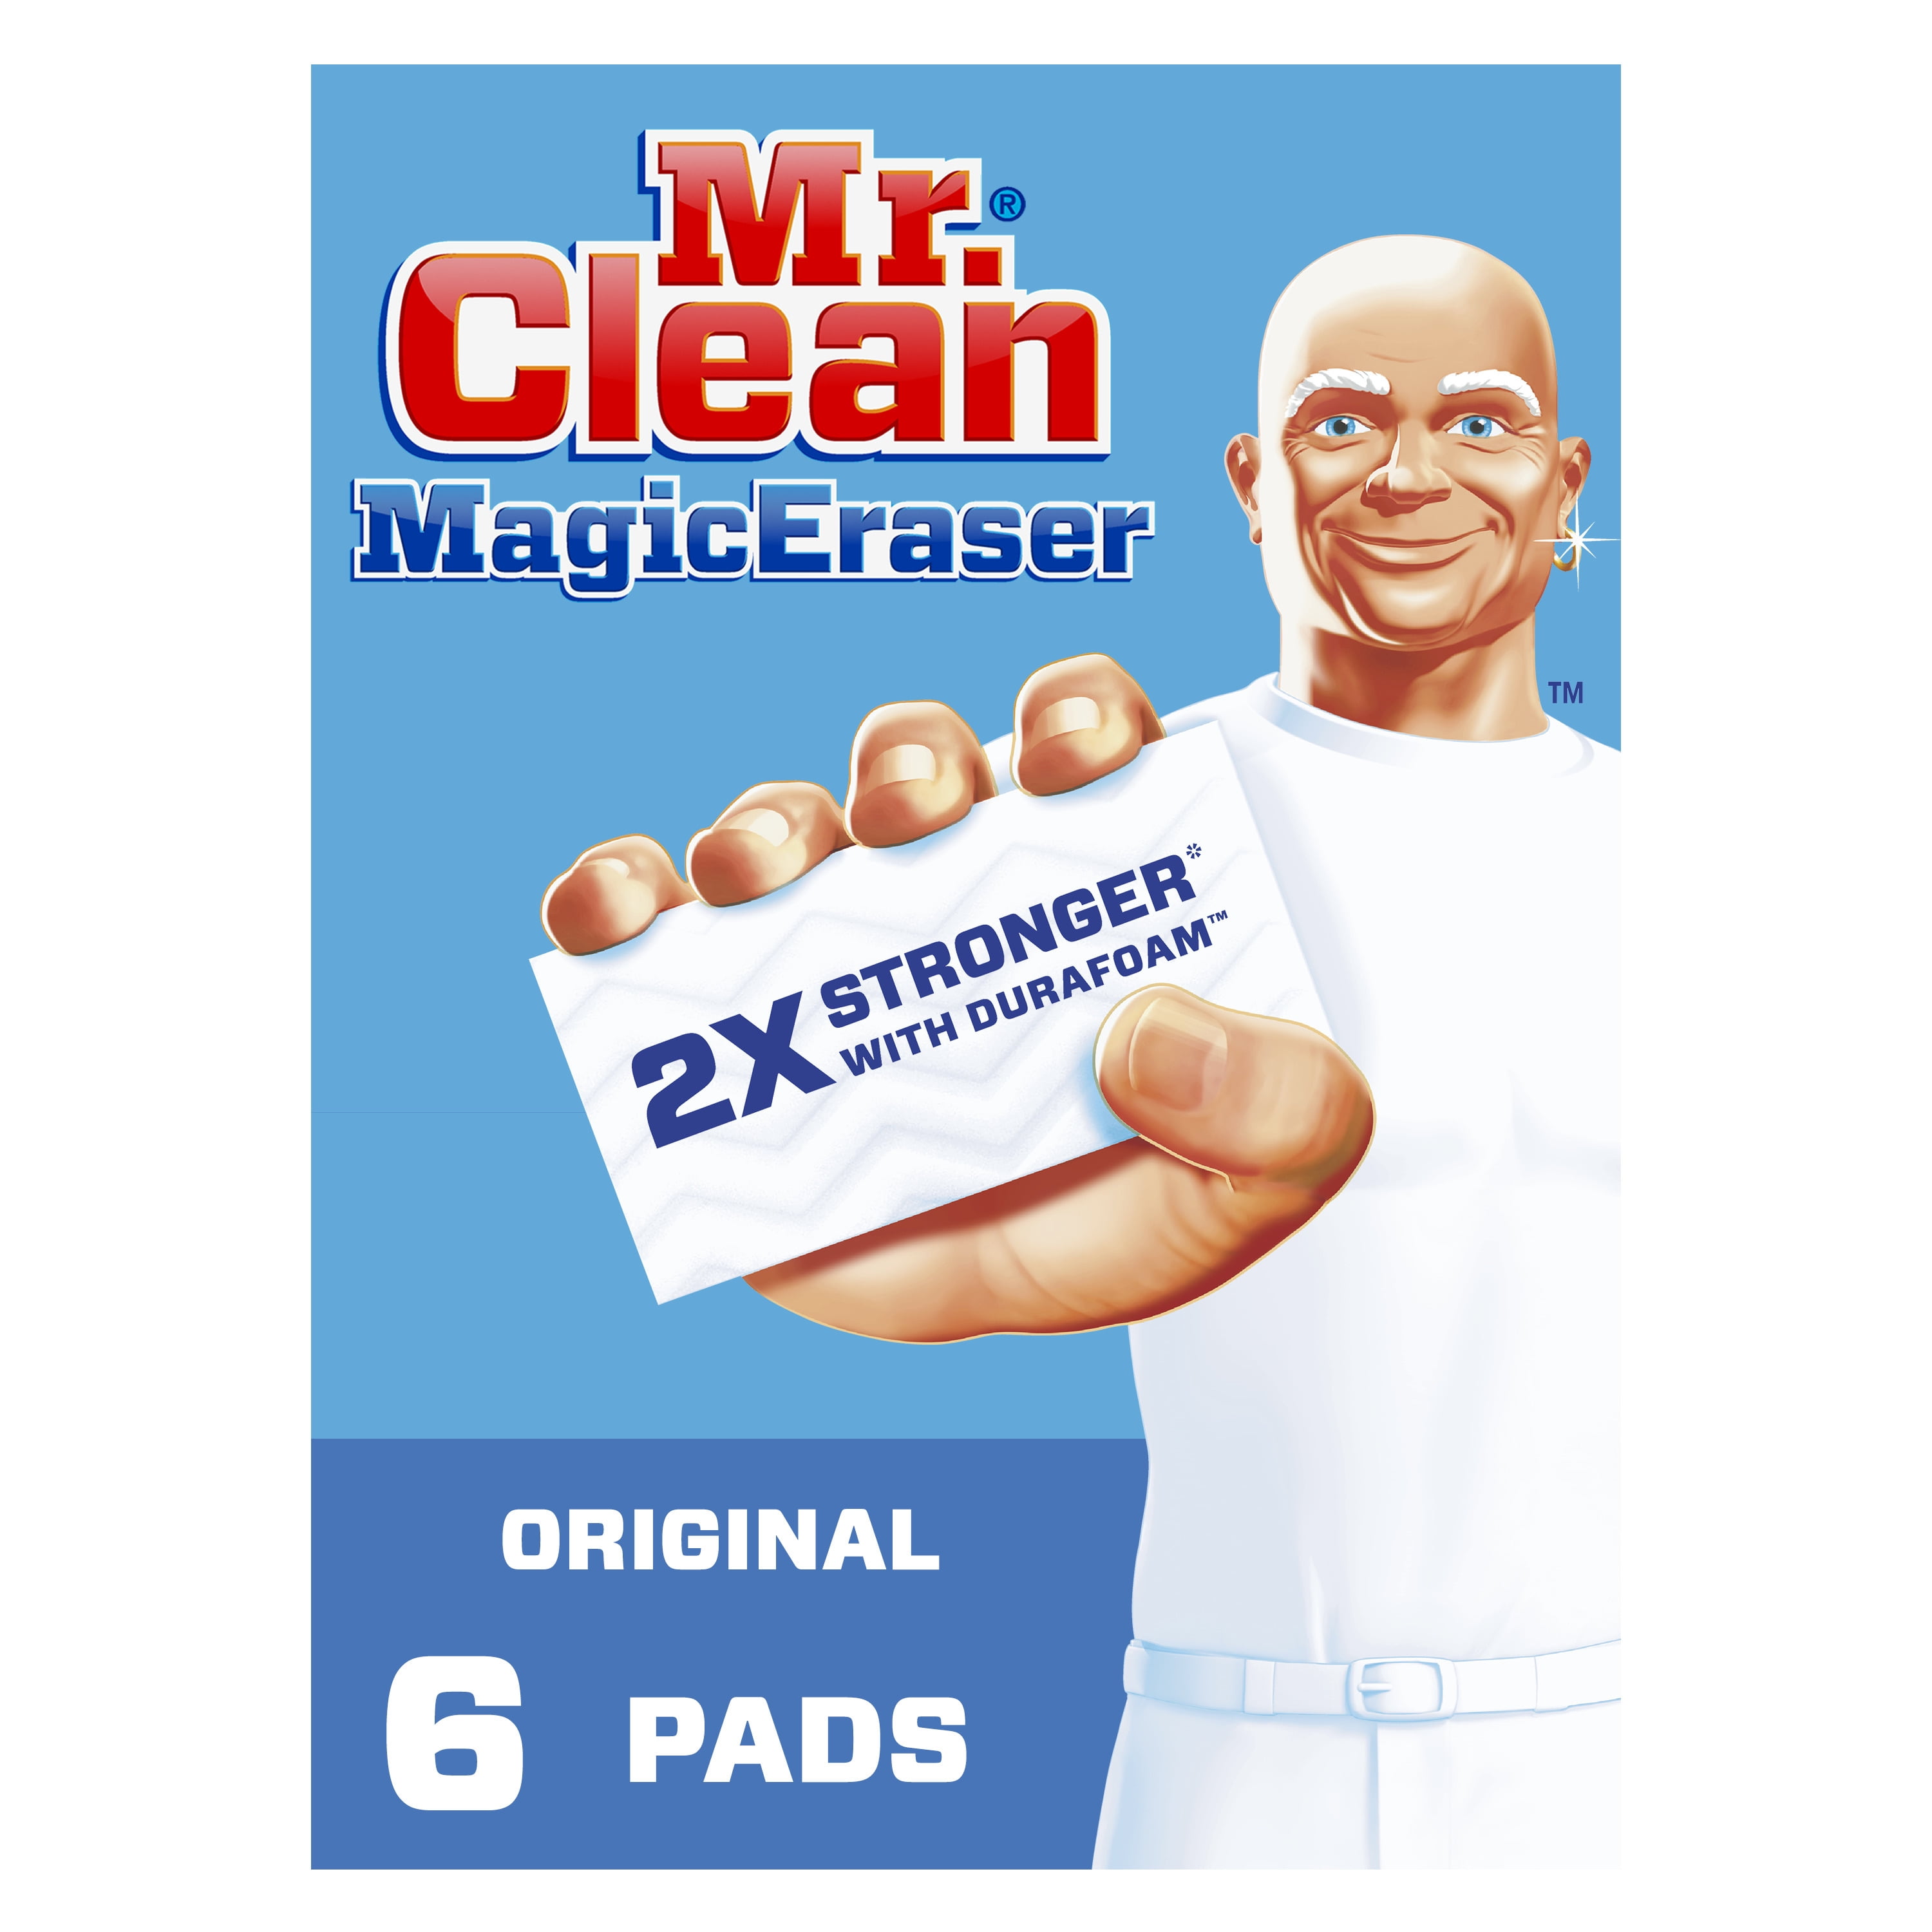 Mr Clean ORIGINAL Magic Eraser HOUSE Cleaning Pads ~Walls Rooms & More 3-Pack 